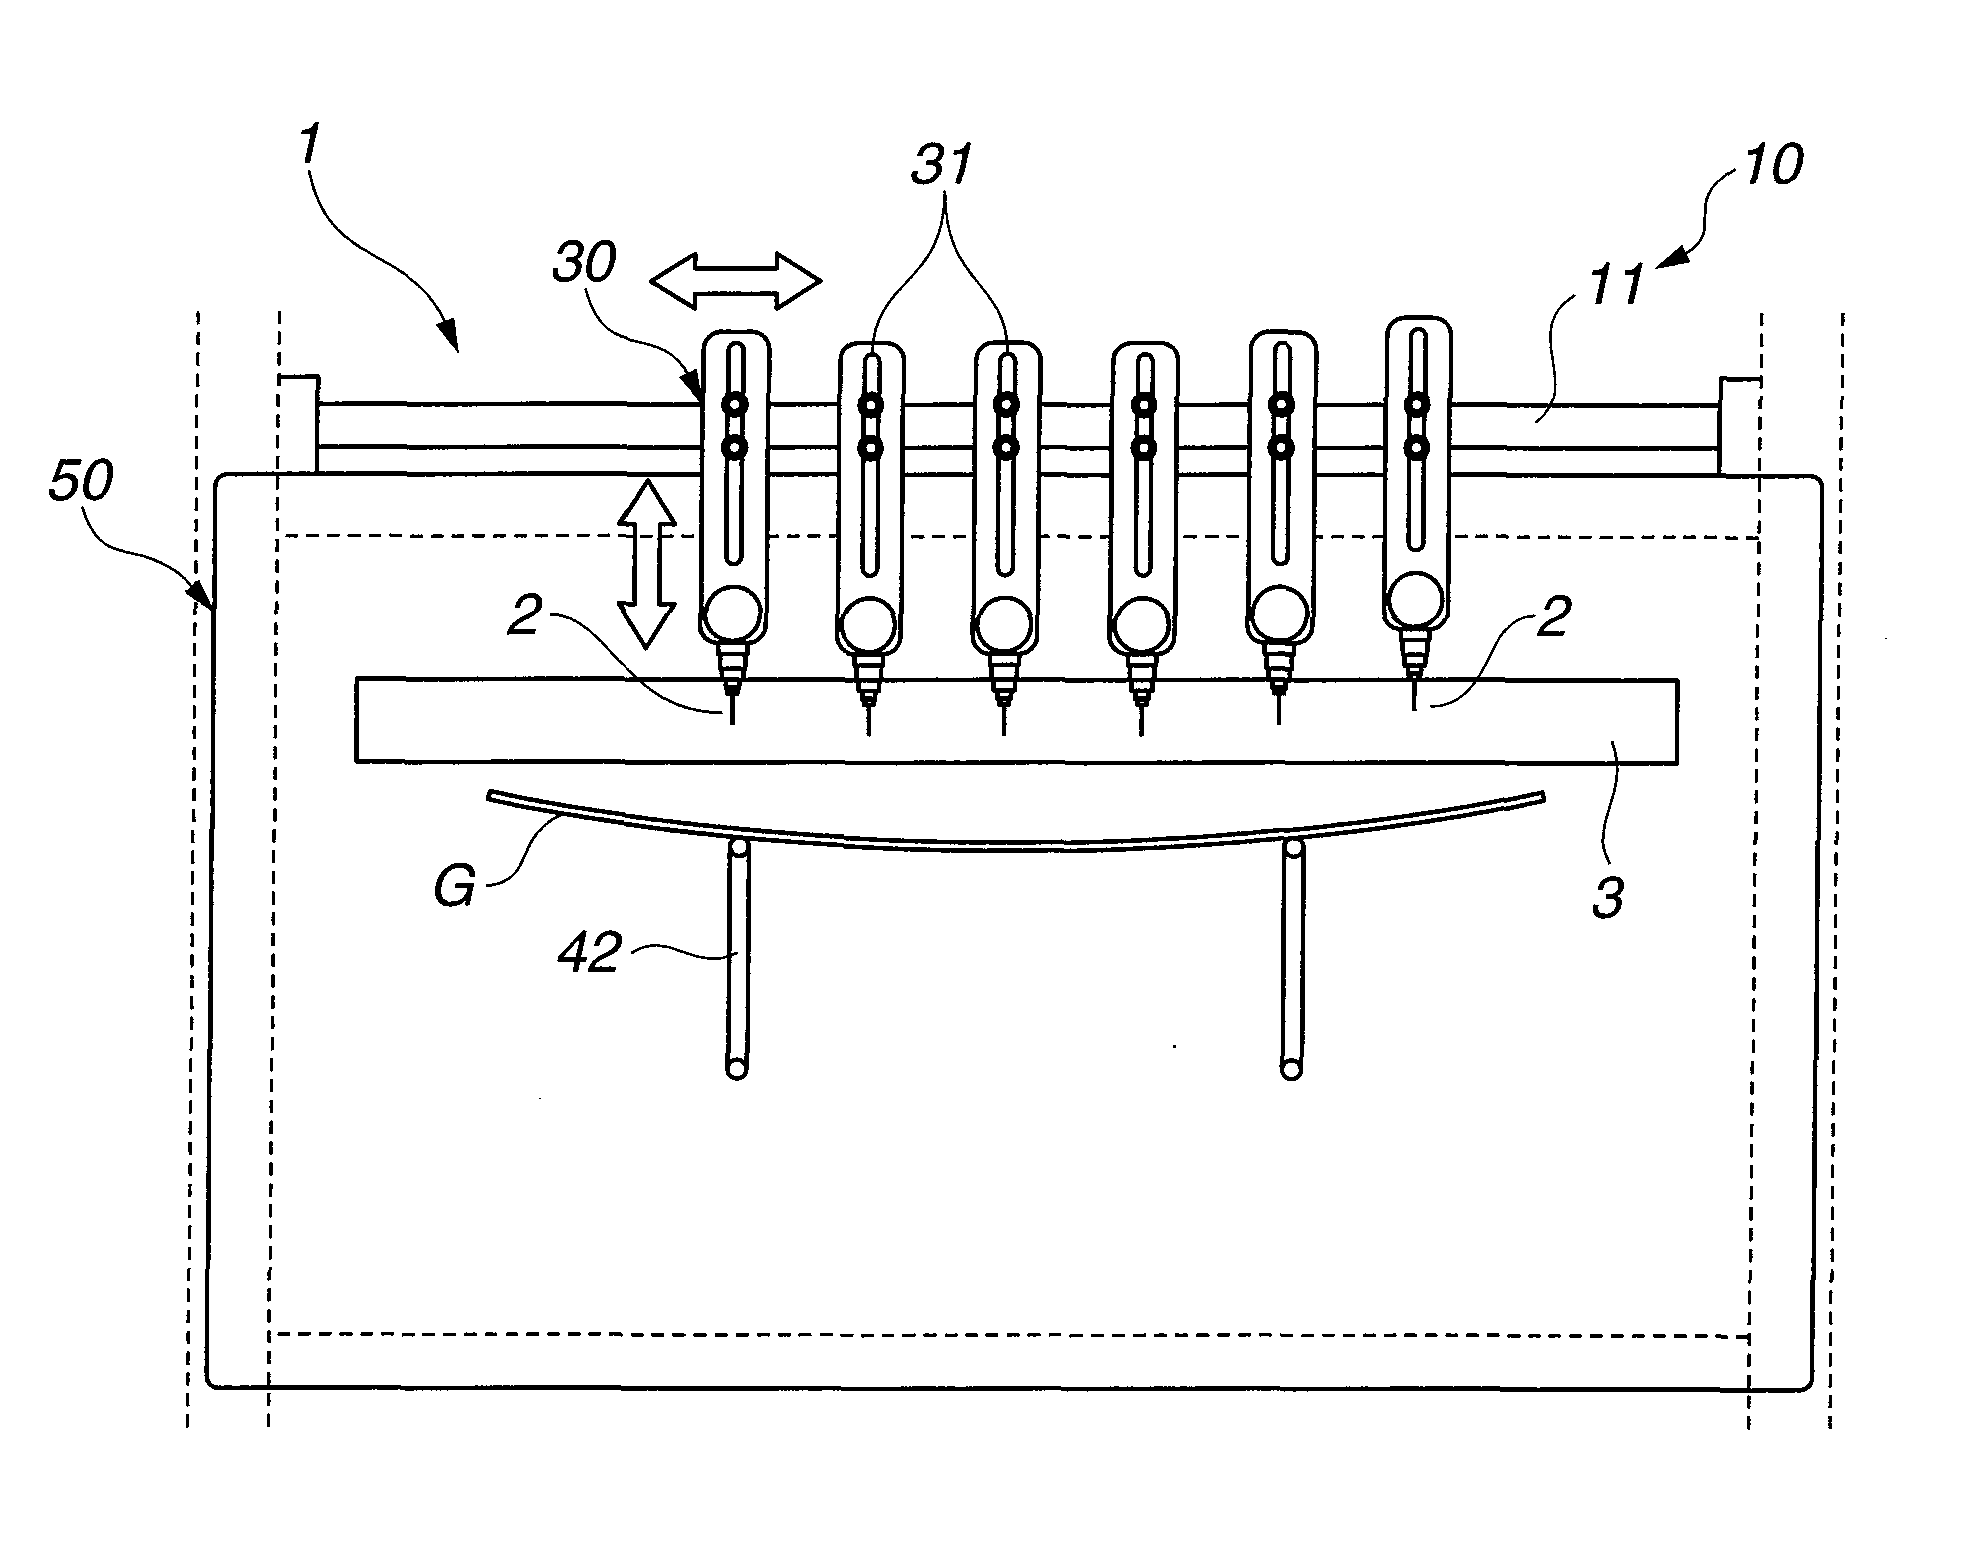 Apparatus and Method of Applying a Coating Solution